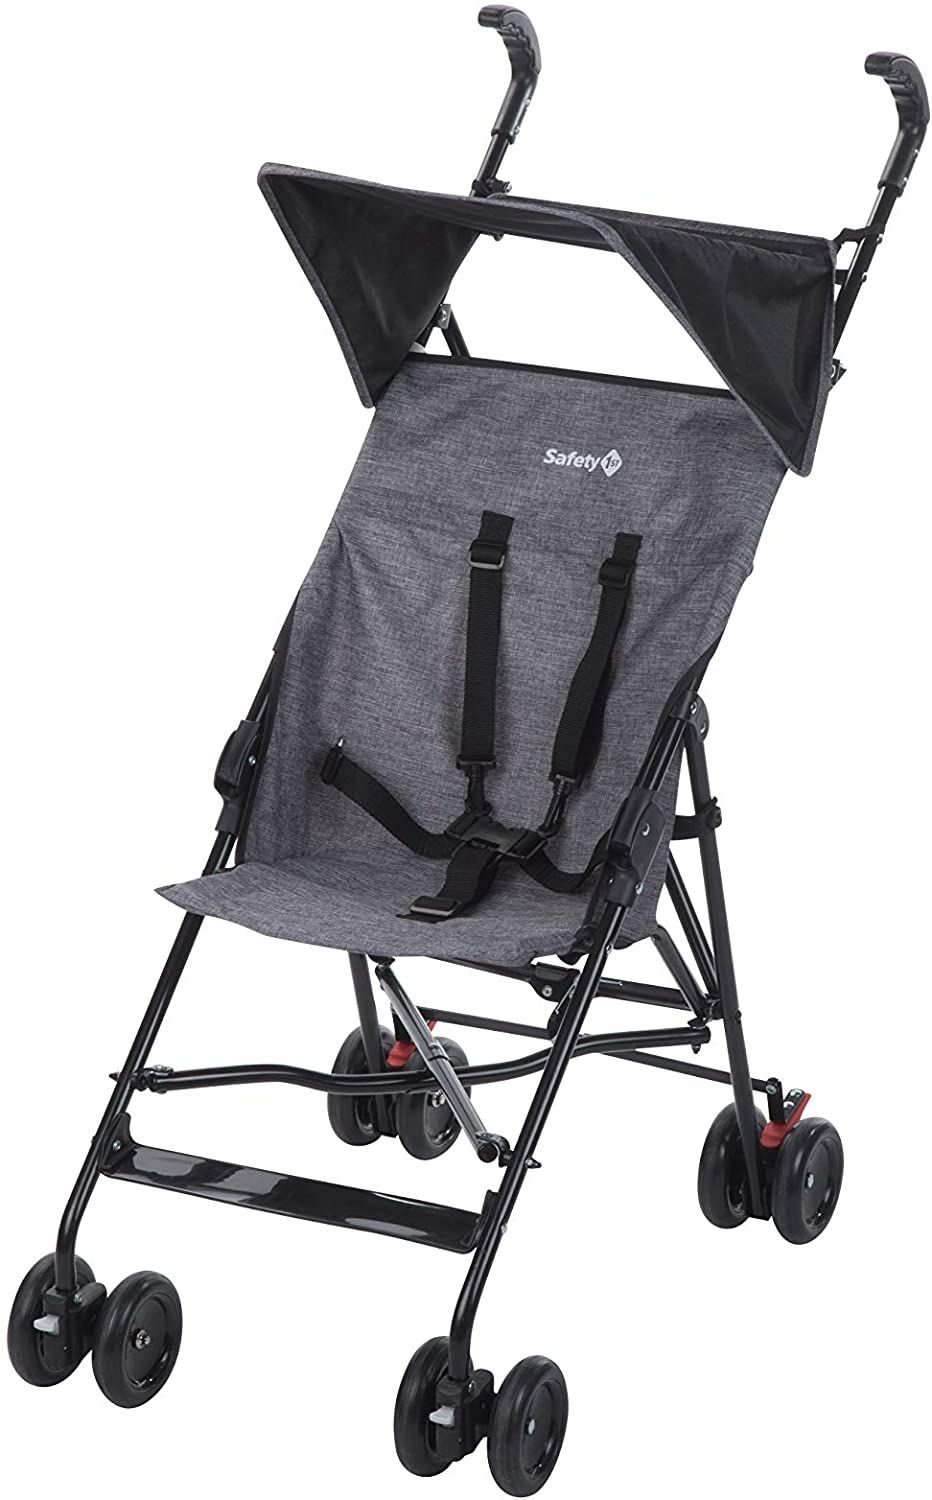 Safety 1st - Peps & Canopy Stroller Black Chic